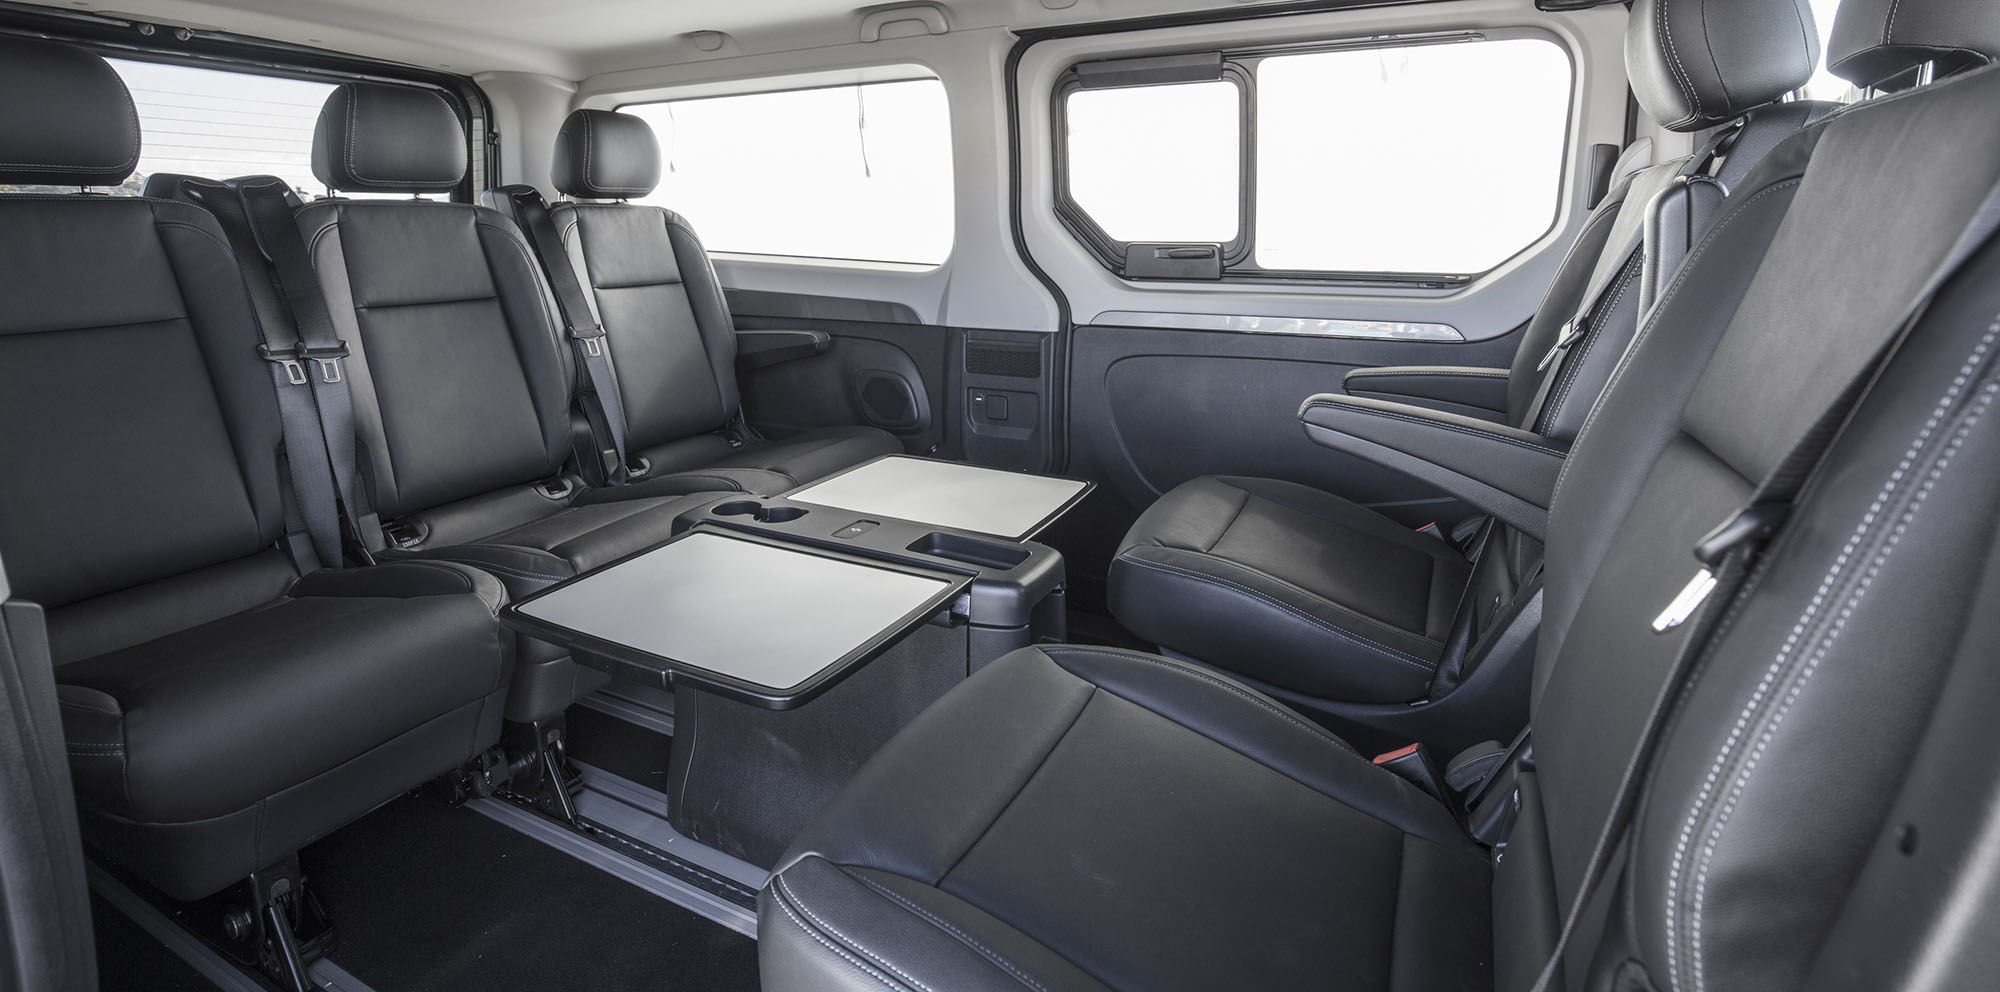 Renault Trafic SpaceClass: Luxury people mover launched in Cannes - UPDATE - photos ...